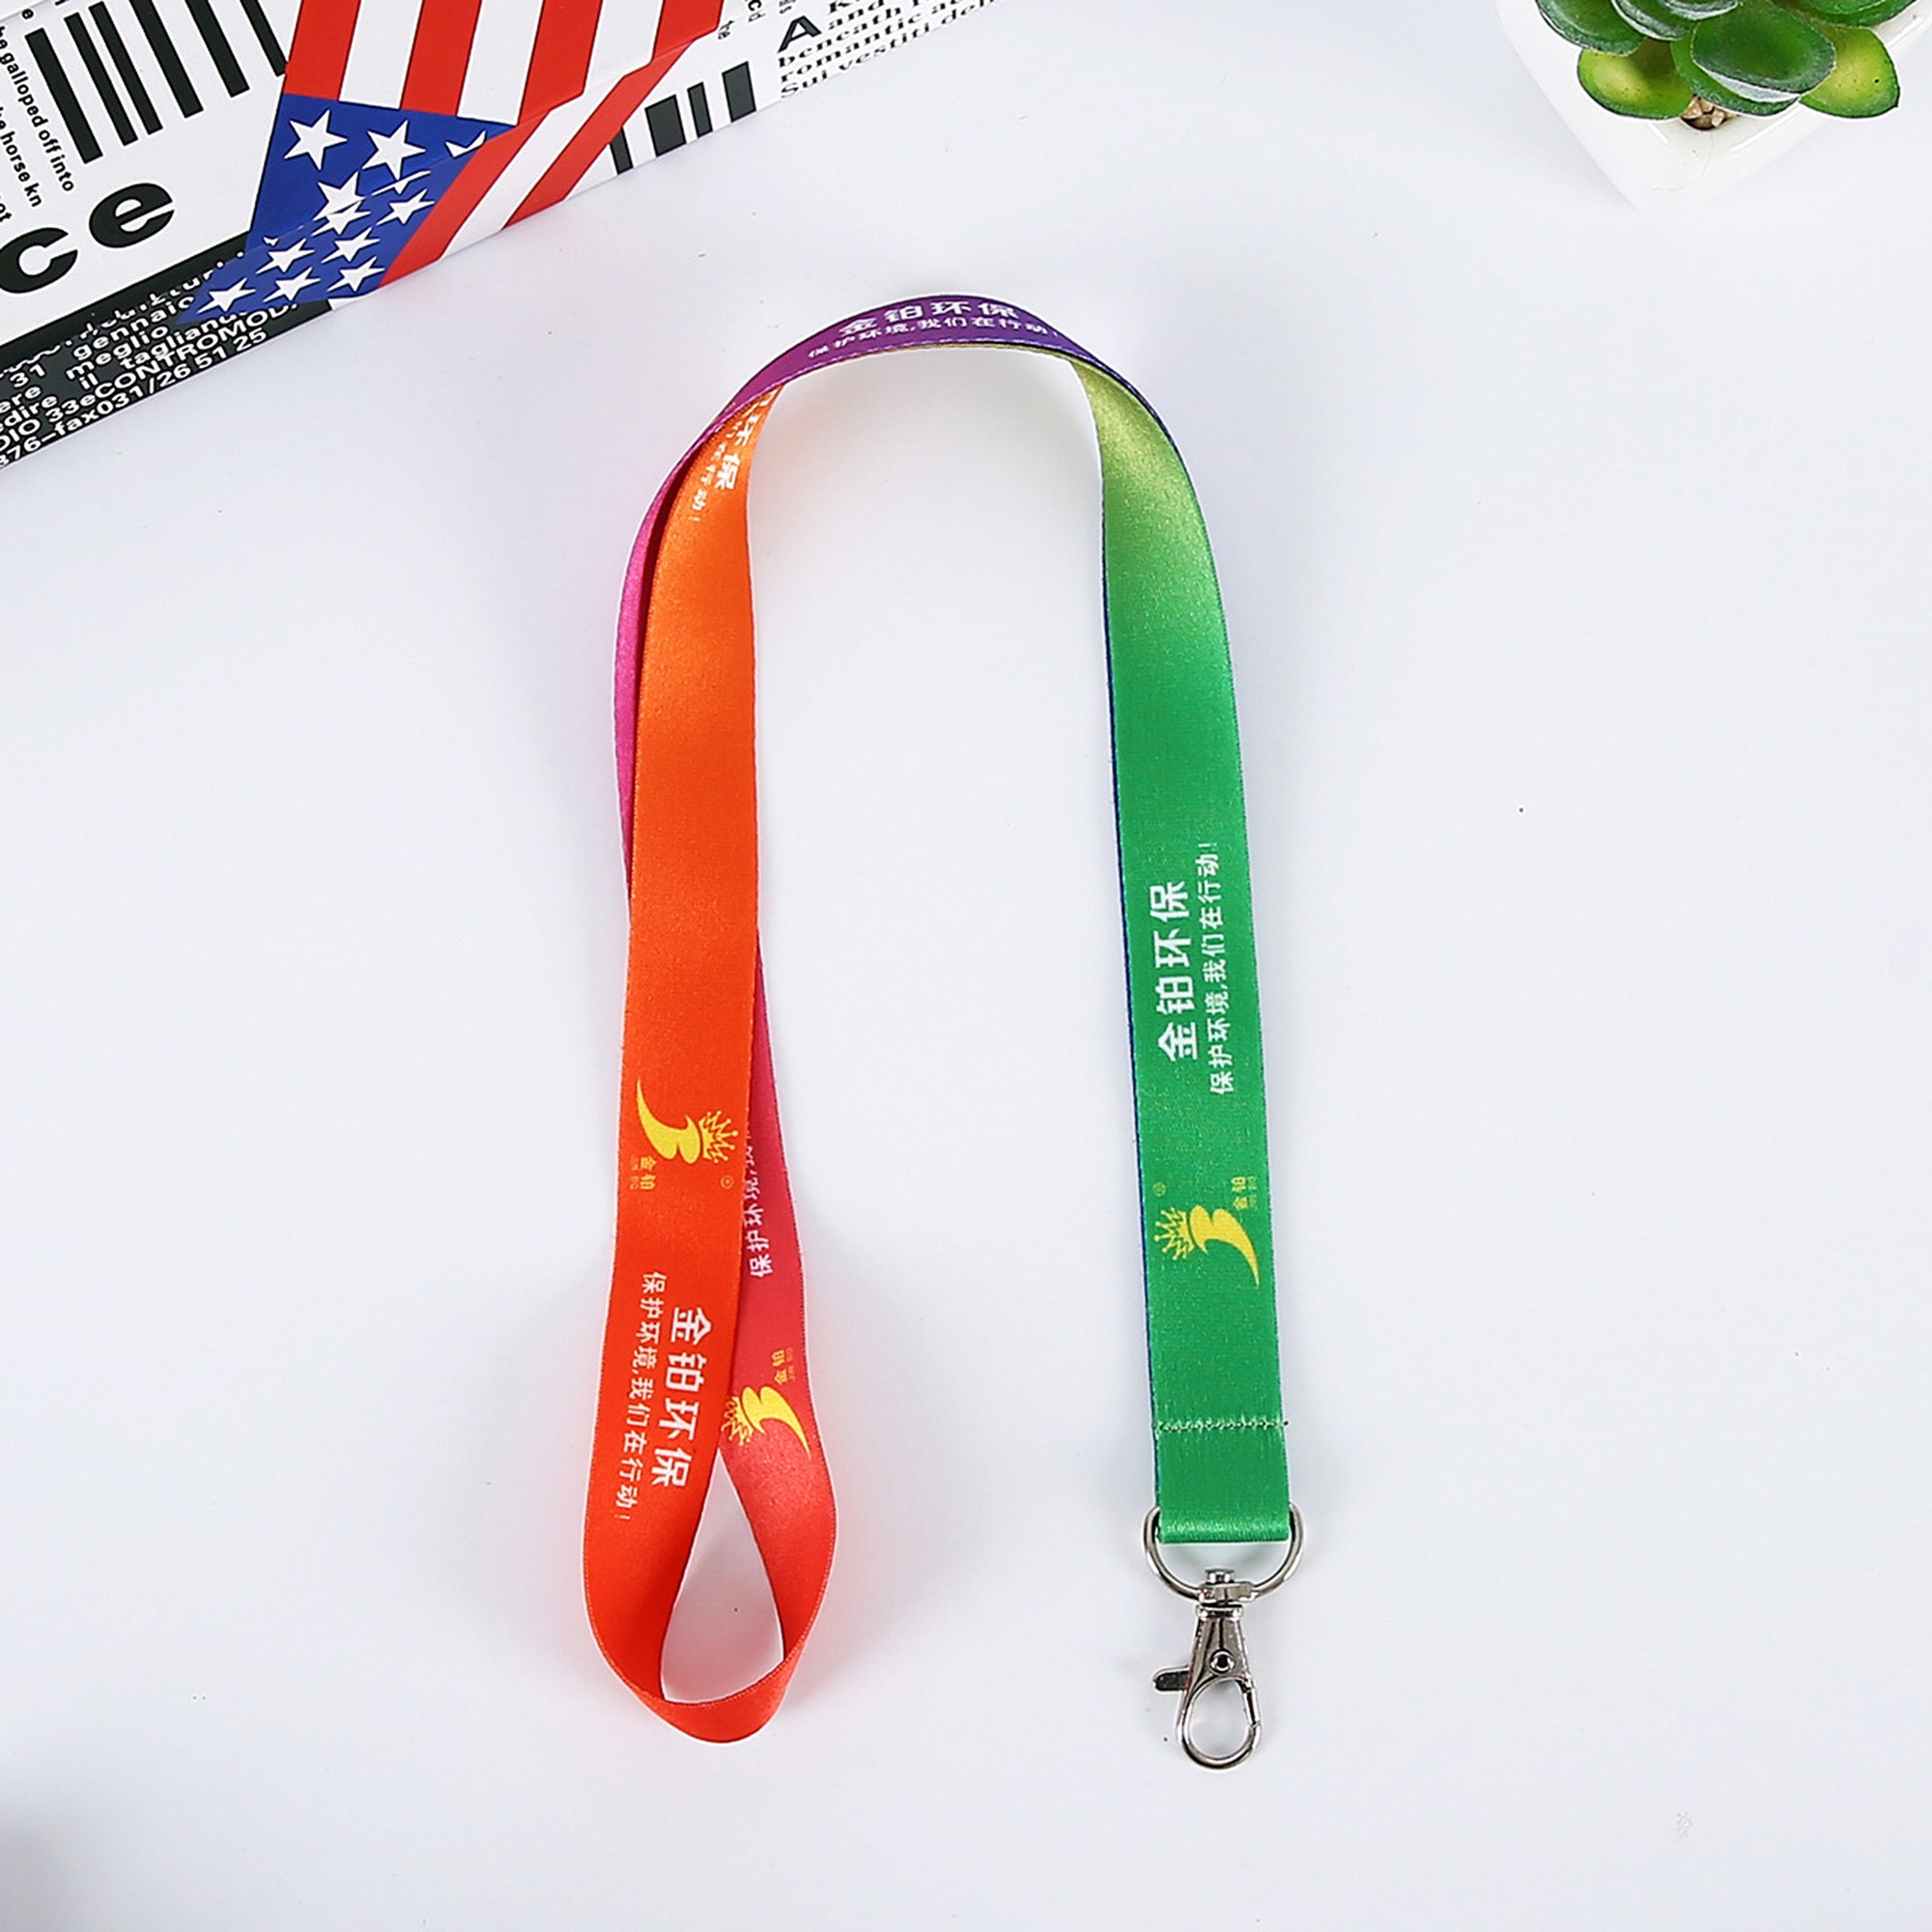 Custom Lanyards in Bulk With Text and Logo, Personalize Office Badge  Lanyard,wrist Strap Keychain Small Qty, Polyester Woven Neck Id Holders 